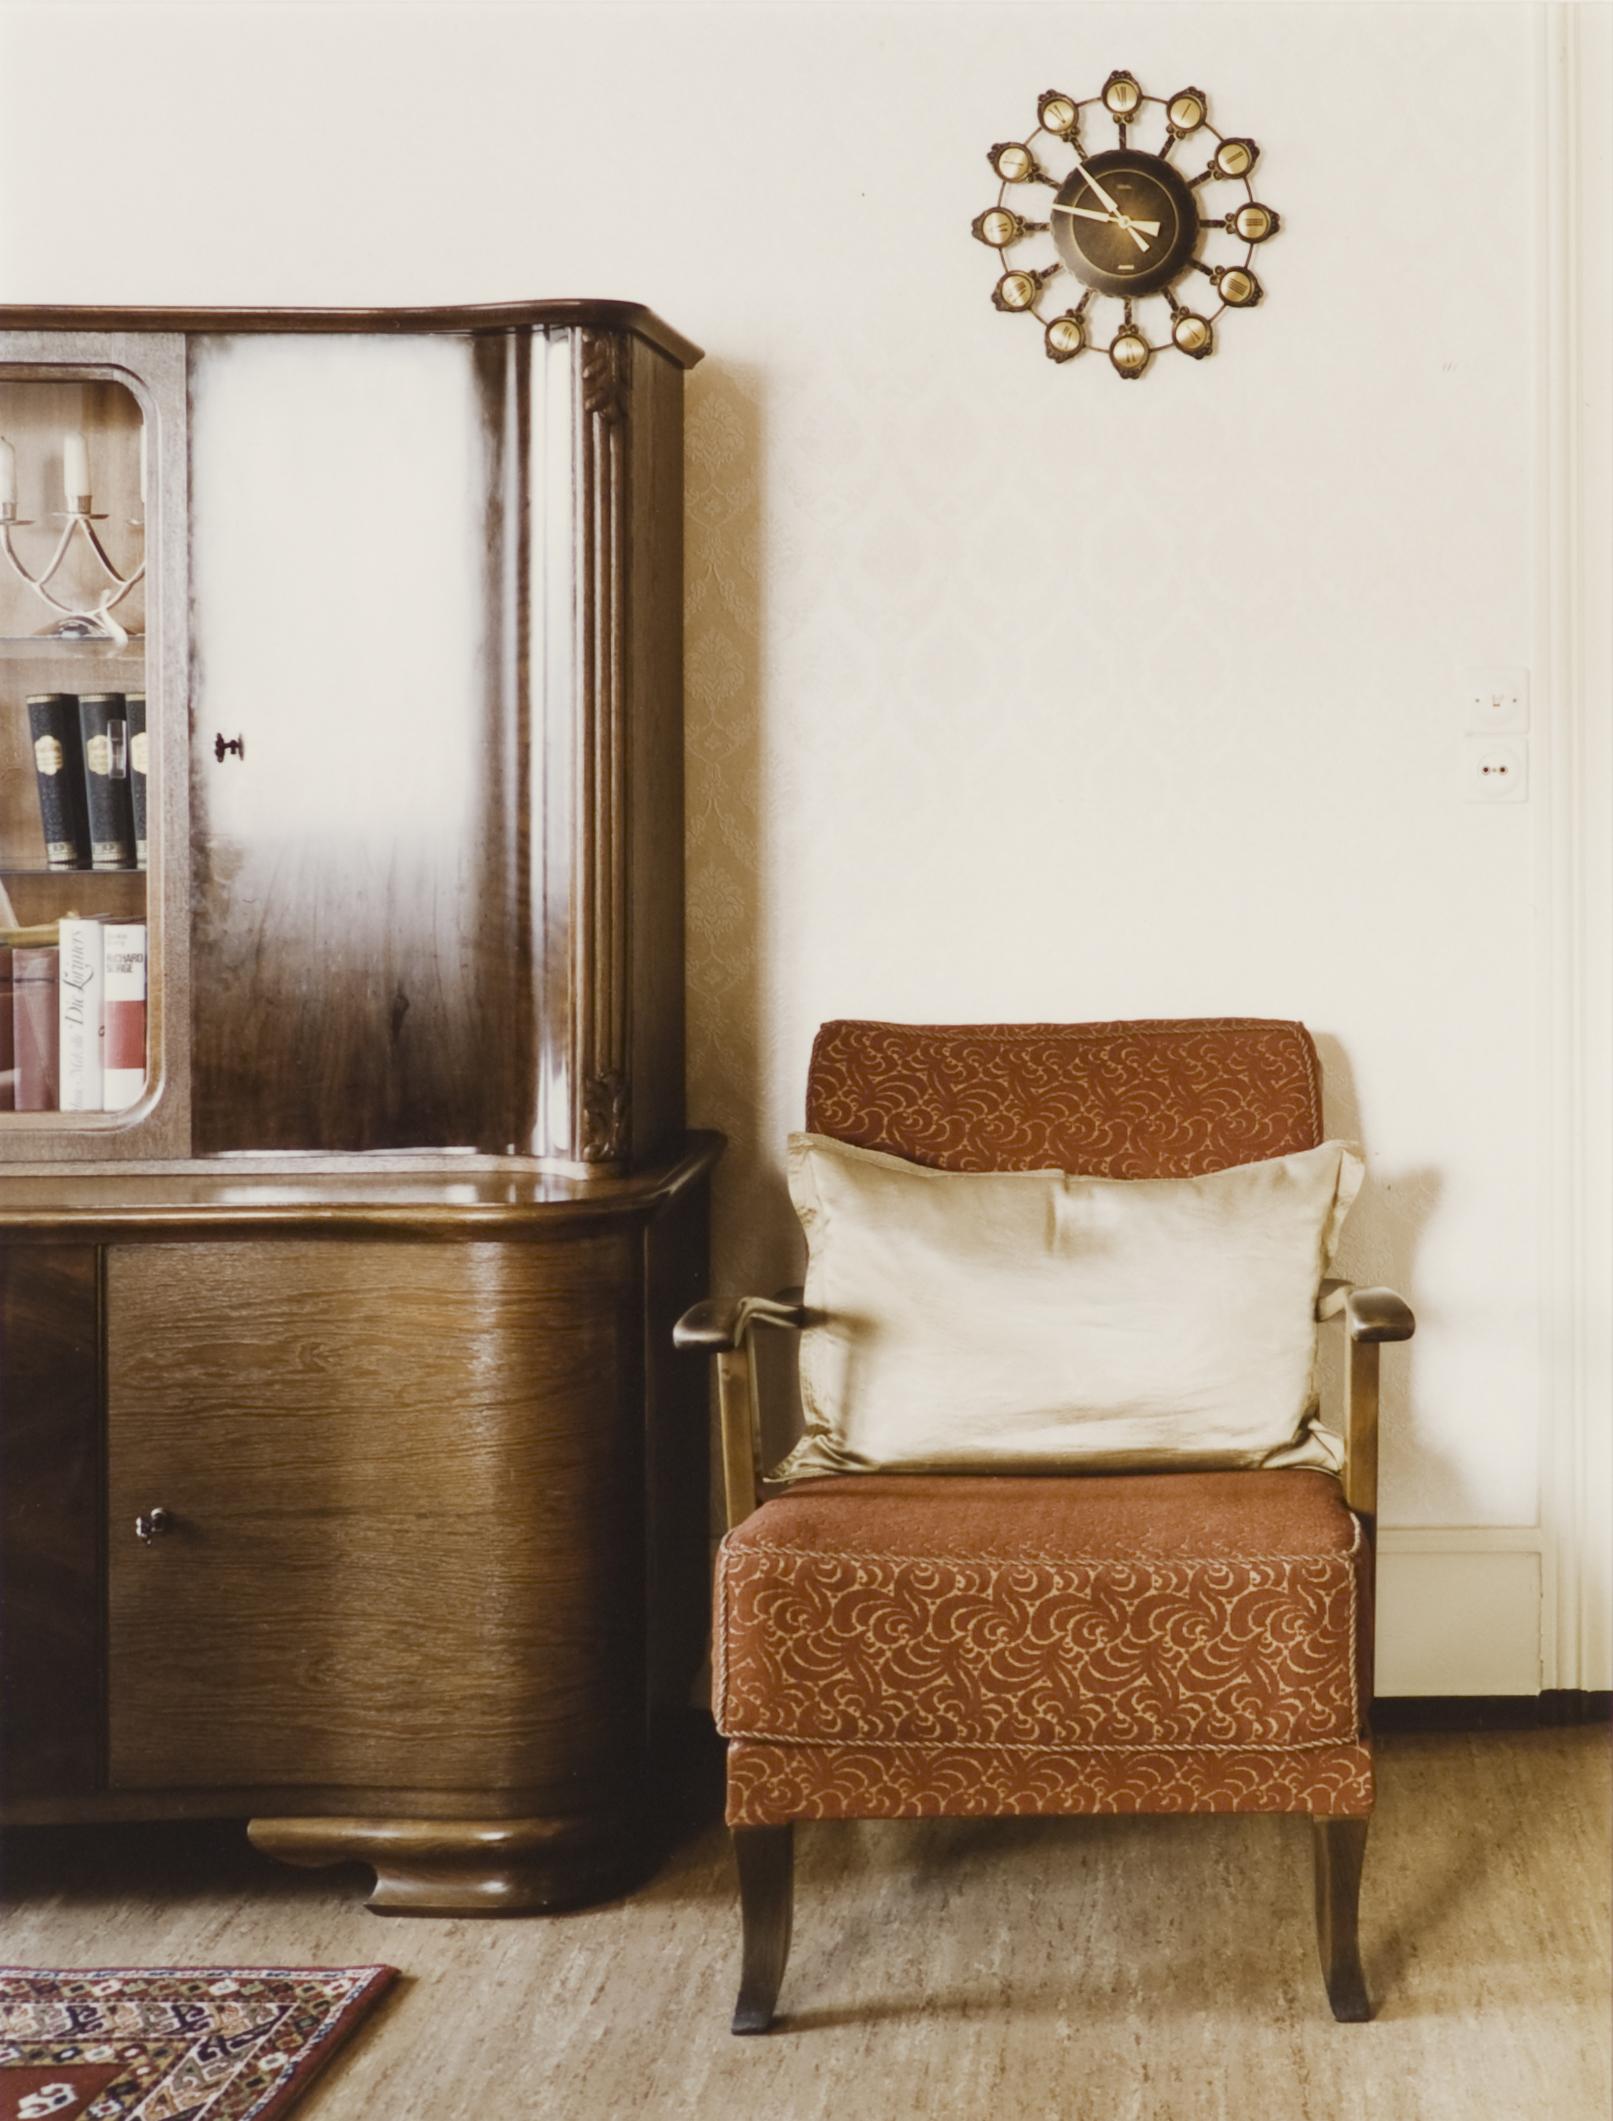 A sepia-toned image shows an armchair with a wooden bureau to the left of it and a clock hung on the wall.